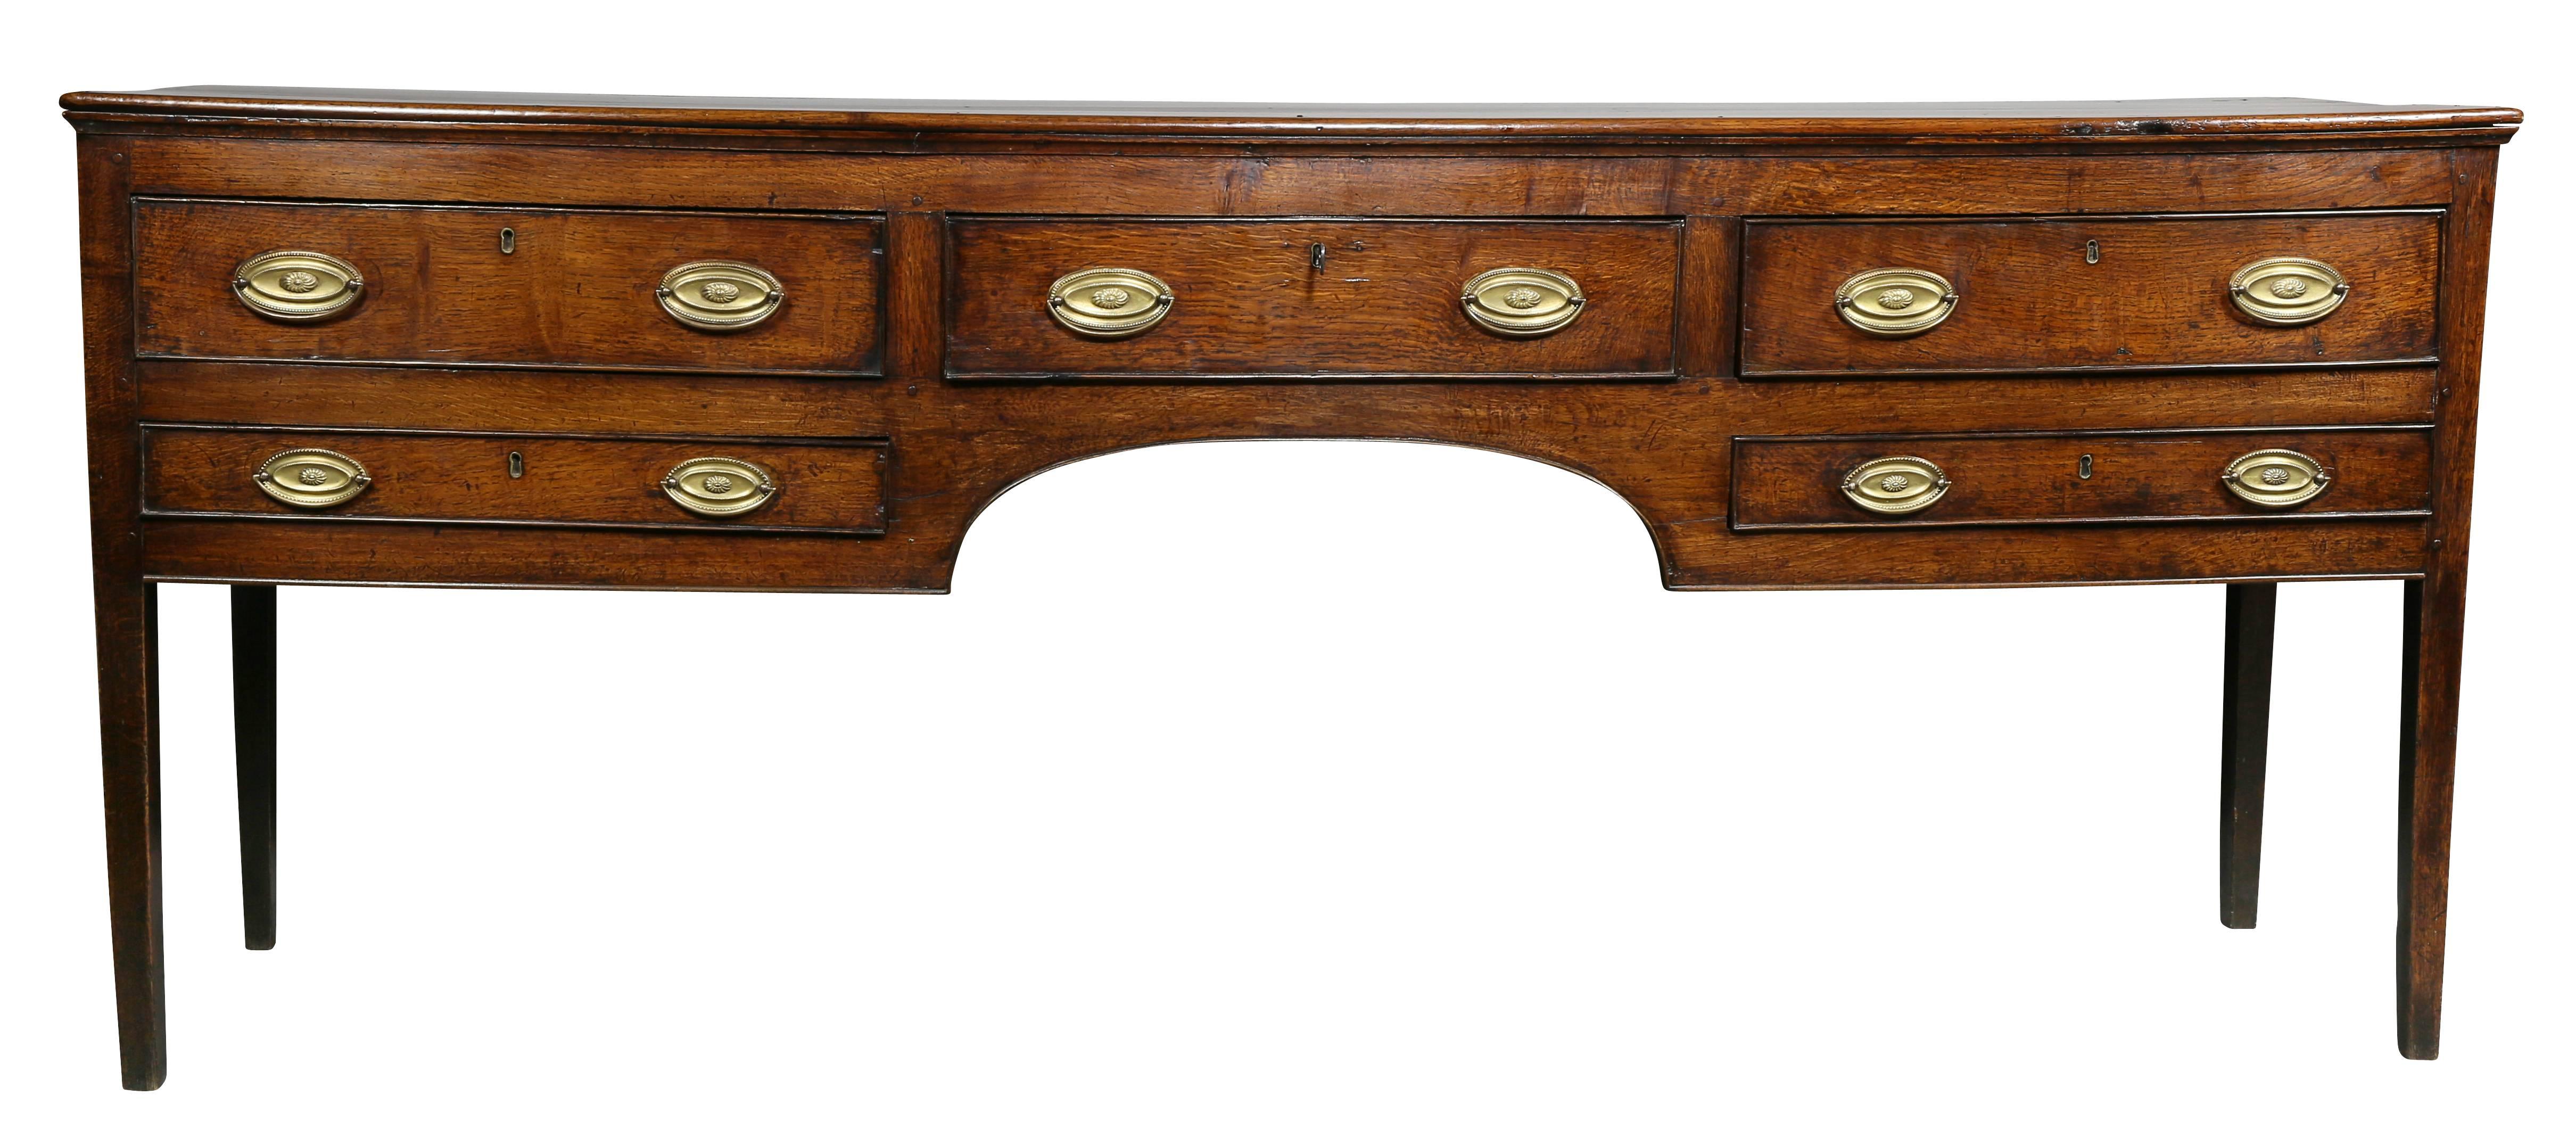 Rectangular top over a central drawer flanked by two drawers, raised on square legs. Panelled ends.